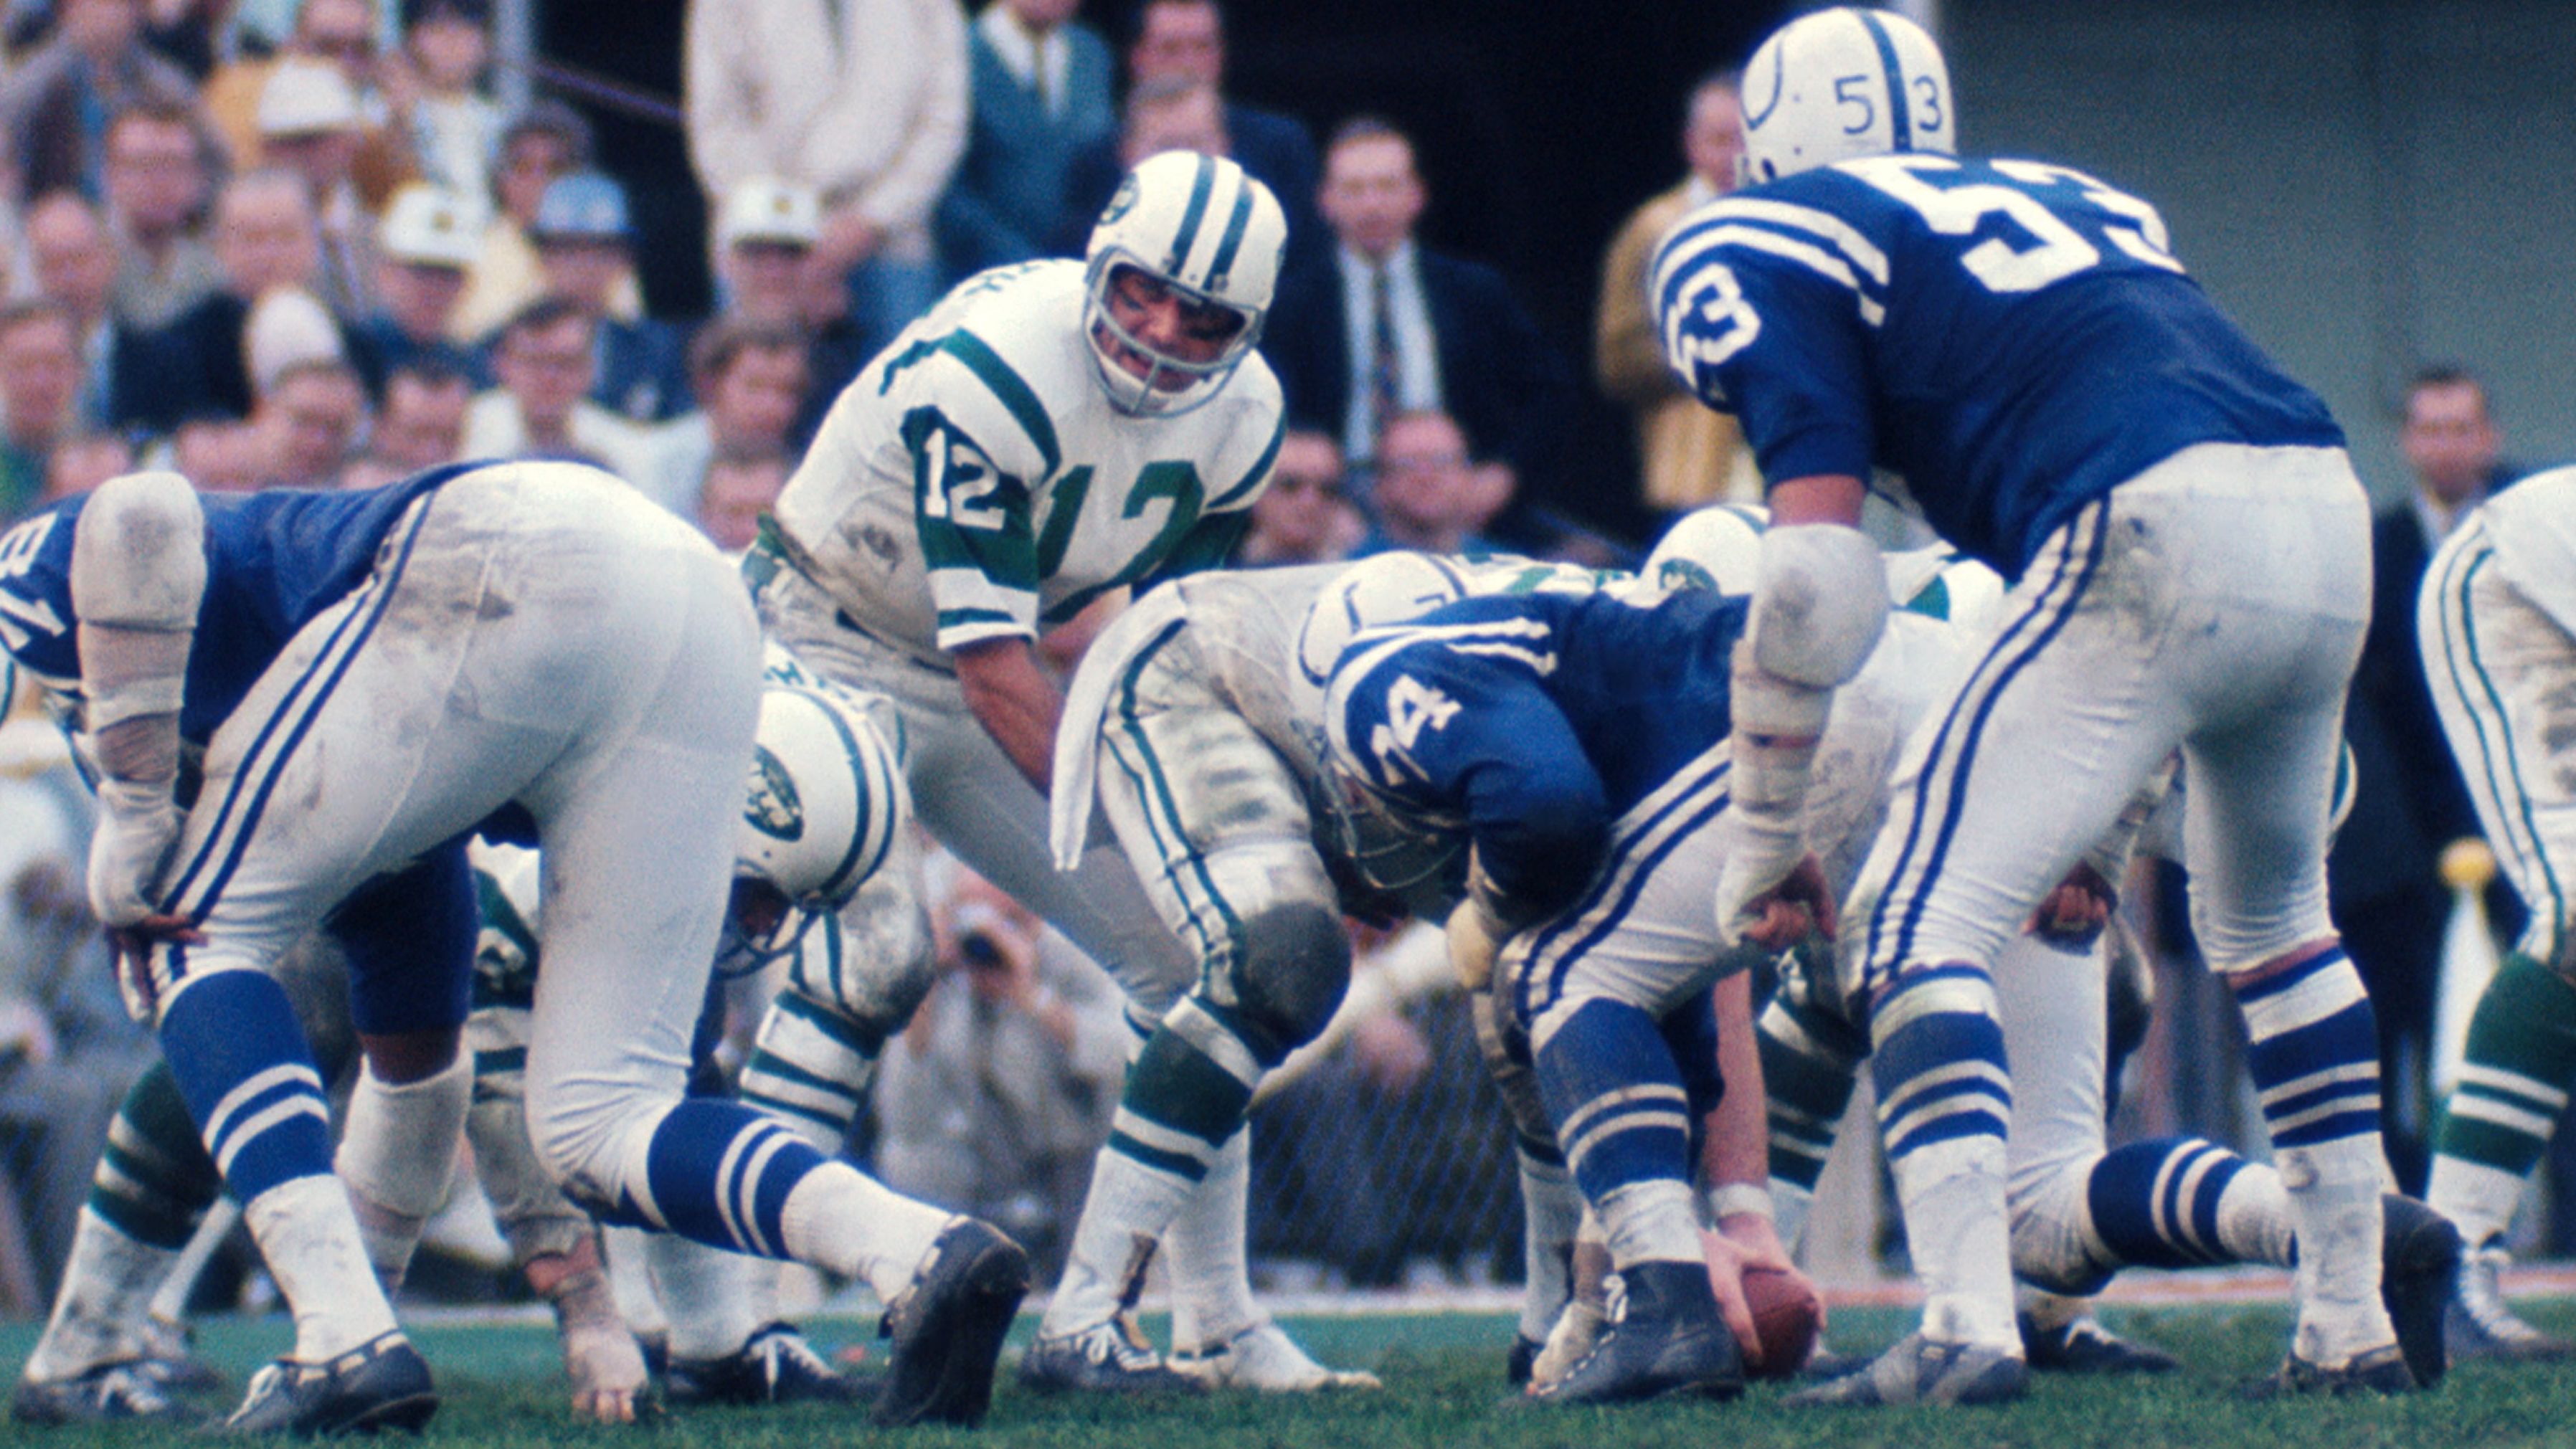 <strong>Super Bowl III (1969):</strong> The New York Jets came into Super Bowl III as 18-point underdogs, but quarterback Joe Namath famously guaranteed that his team would upset the Baltimore Colts. After Namath led the way to a 16-7 victory, he was named the game's Most Valuable Player.